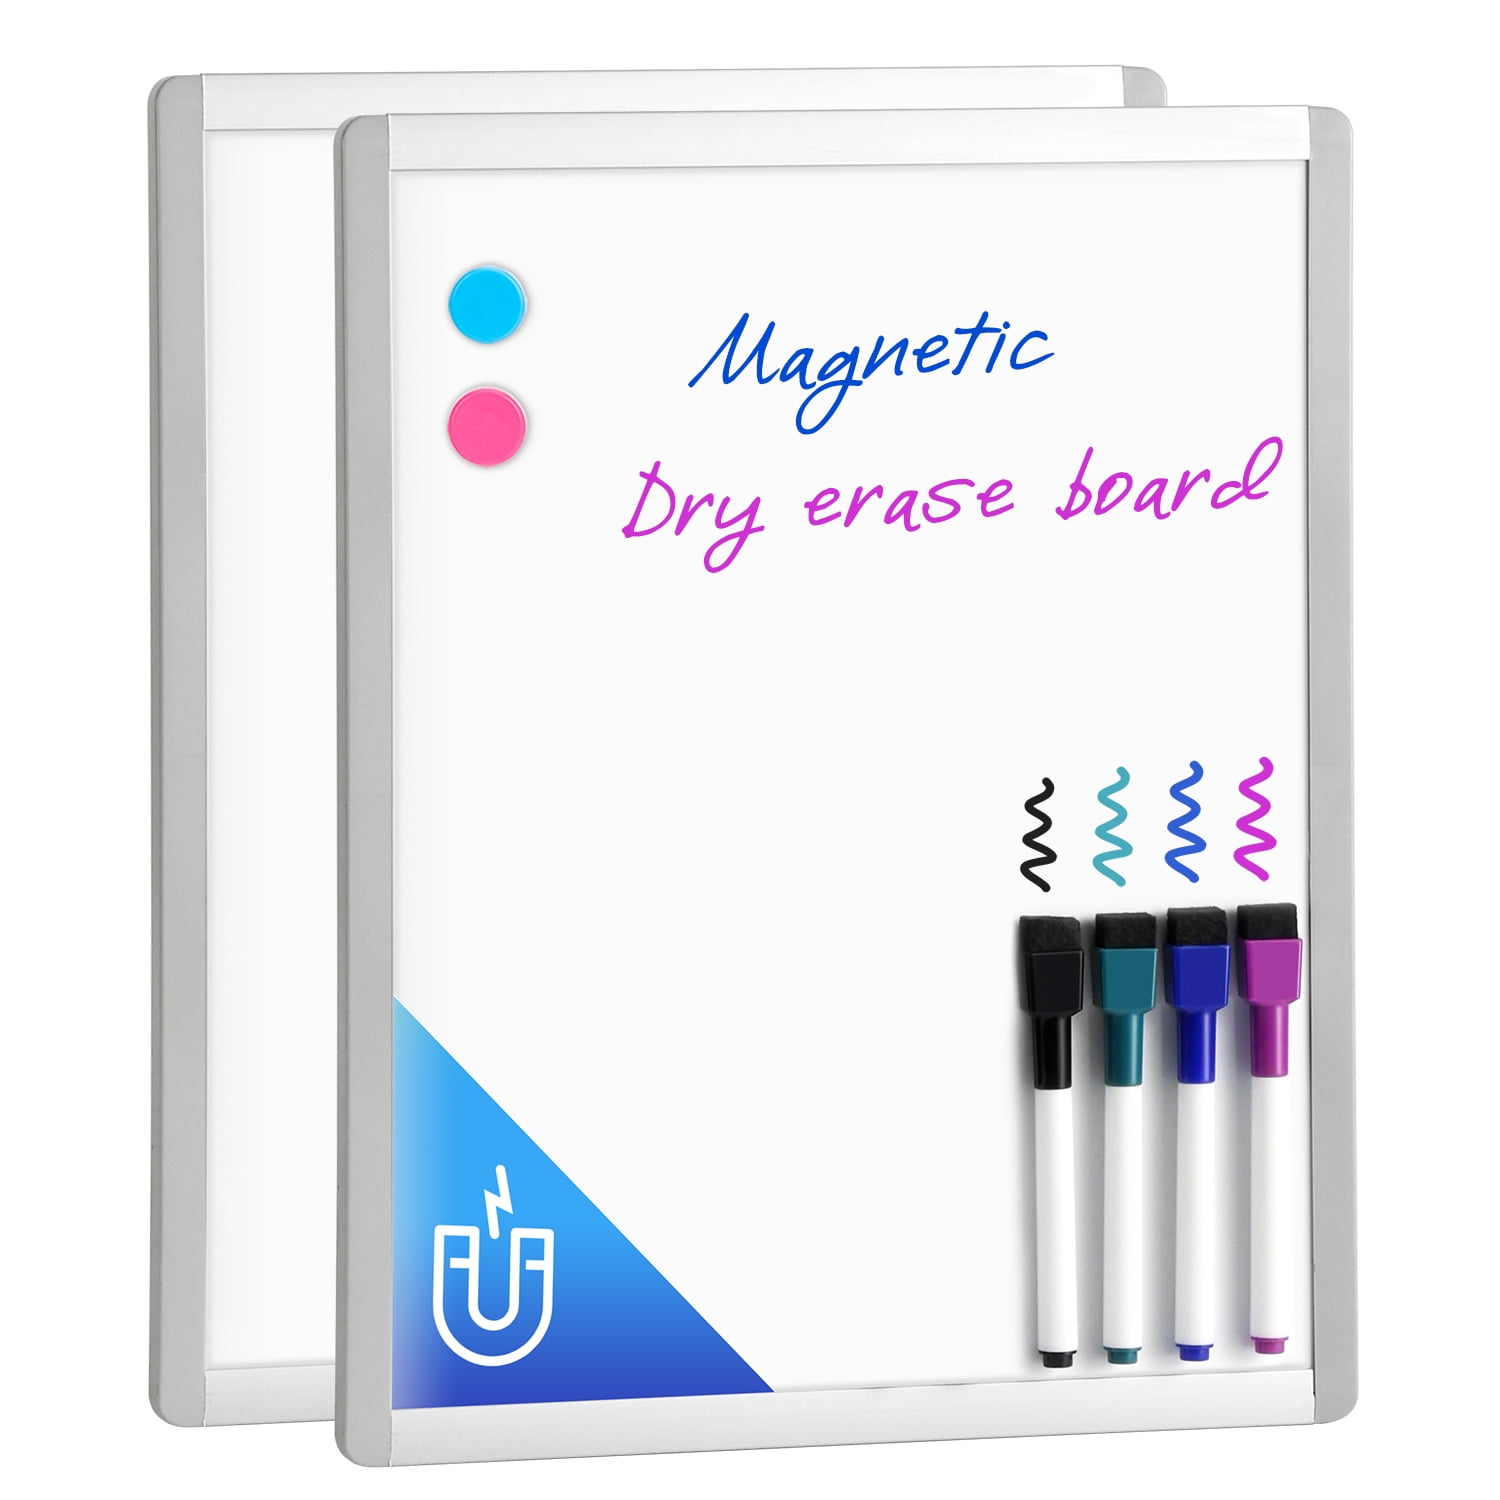 Kedudes Premium Magnetic 11’’ x 14’’ Small Dry Erase Board. Includes 6 Magnetic Dry Erase Markers, Assorted Colors. Great Whiteboard for